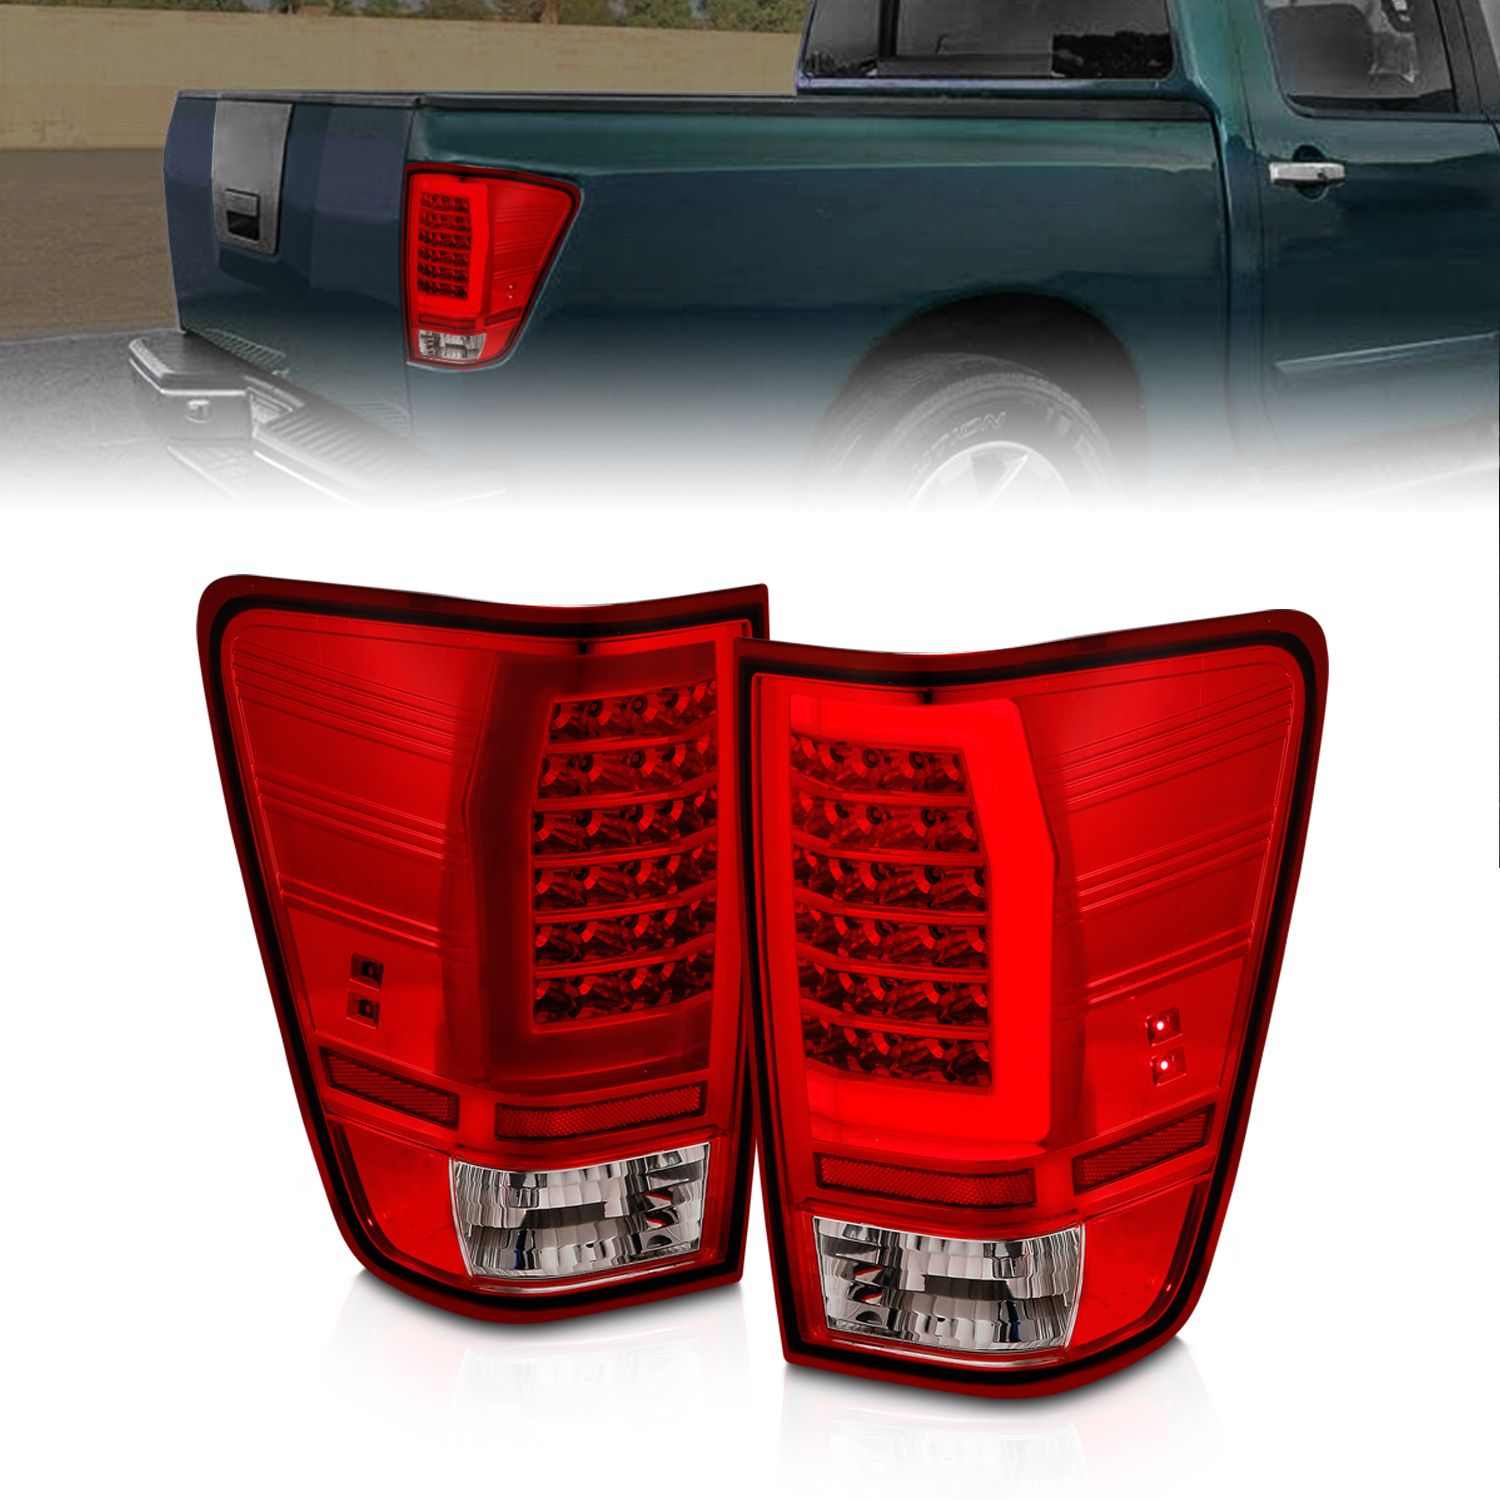 2004 -2015 NISSAN TITAN LED TAIL LIGHTS CHROME HOUSING RED/CLEAR LENS WITH C LIGHT BAR (W/O UTILITY COMPART)